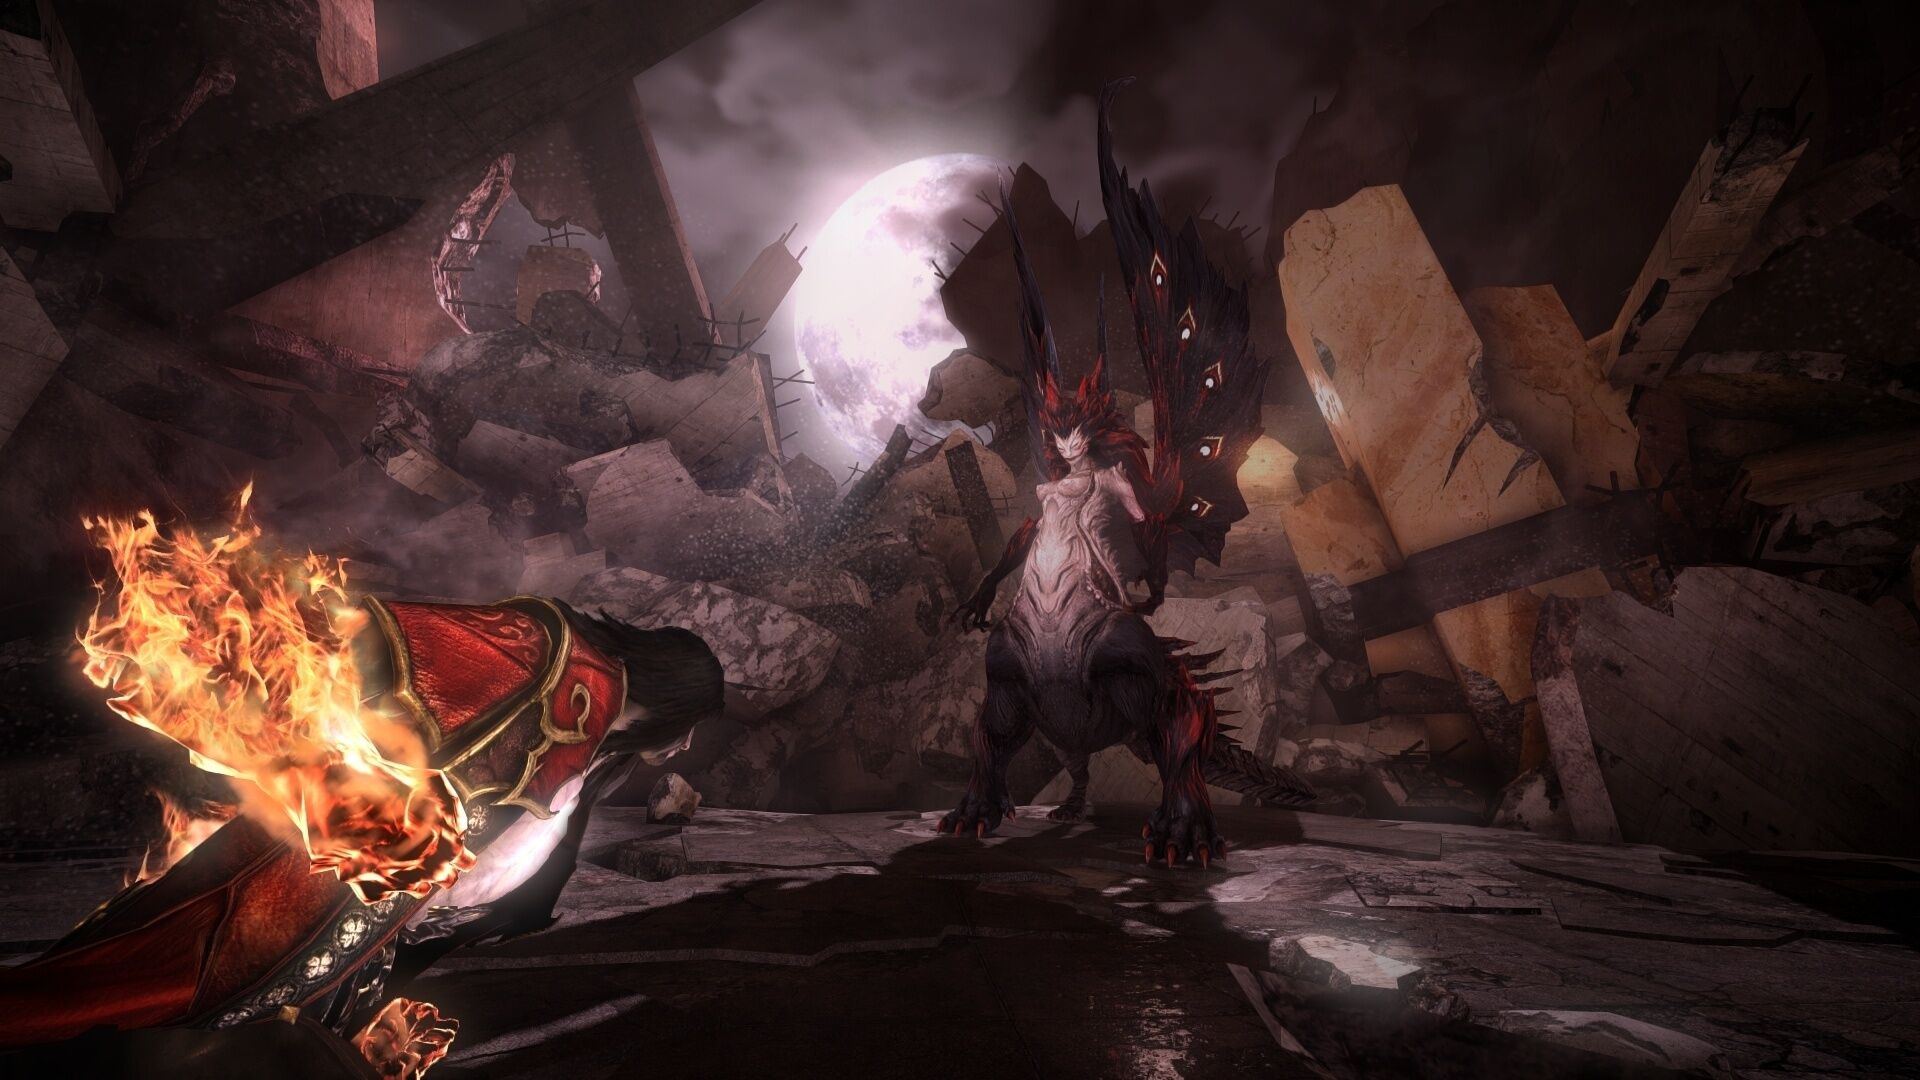 Castlevania: Lords of Shadow 2 released